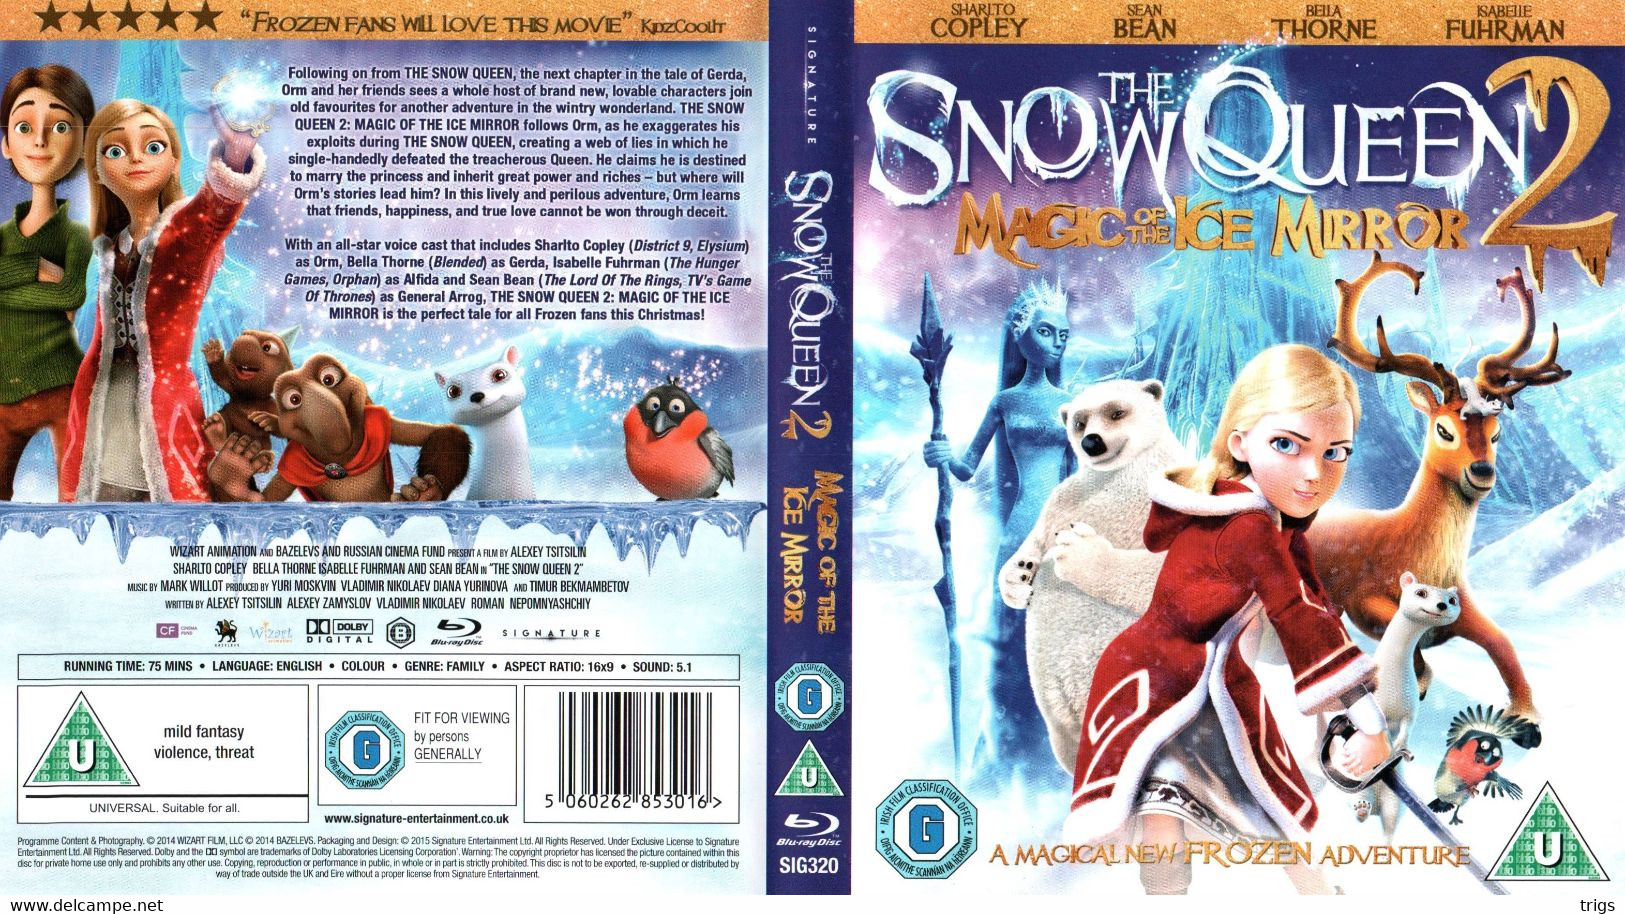 BLUE RAY - The Snow Queen 2: Magic Of The Ice Mirror - Animation